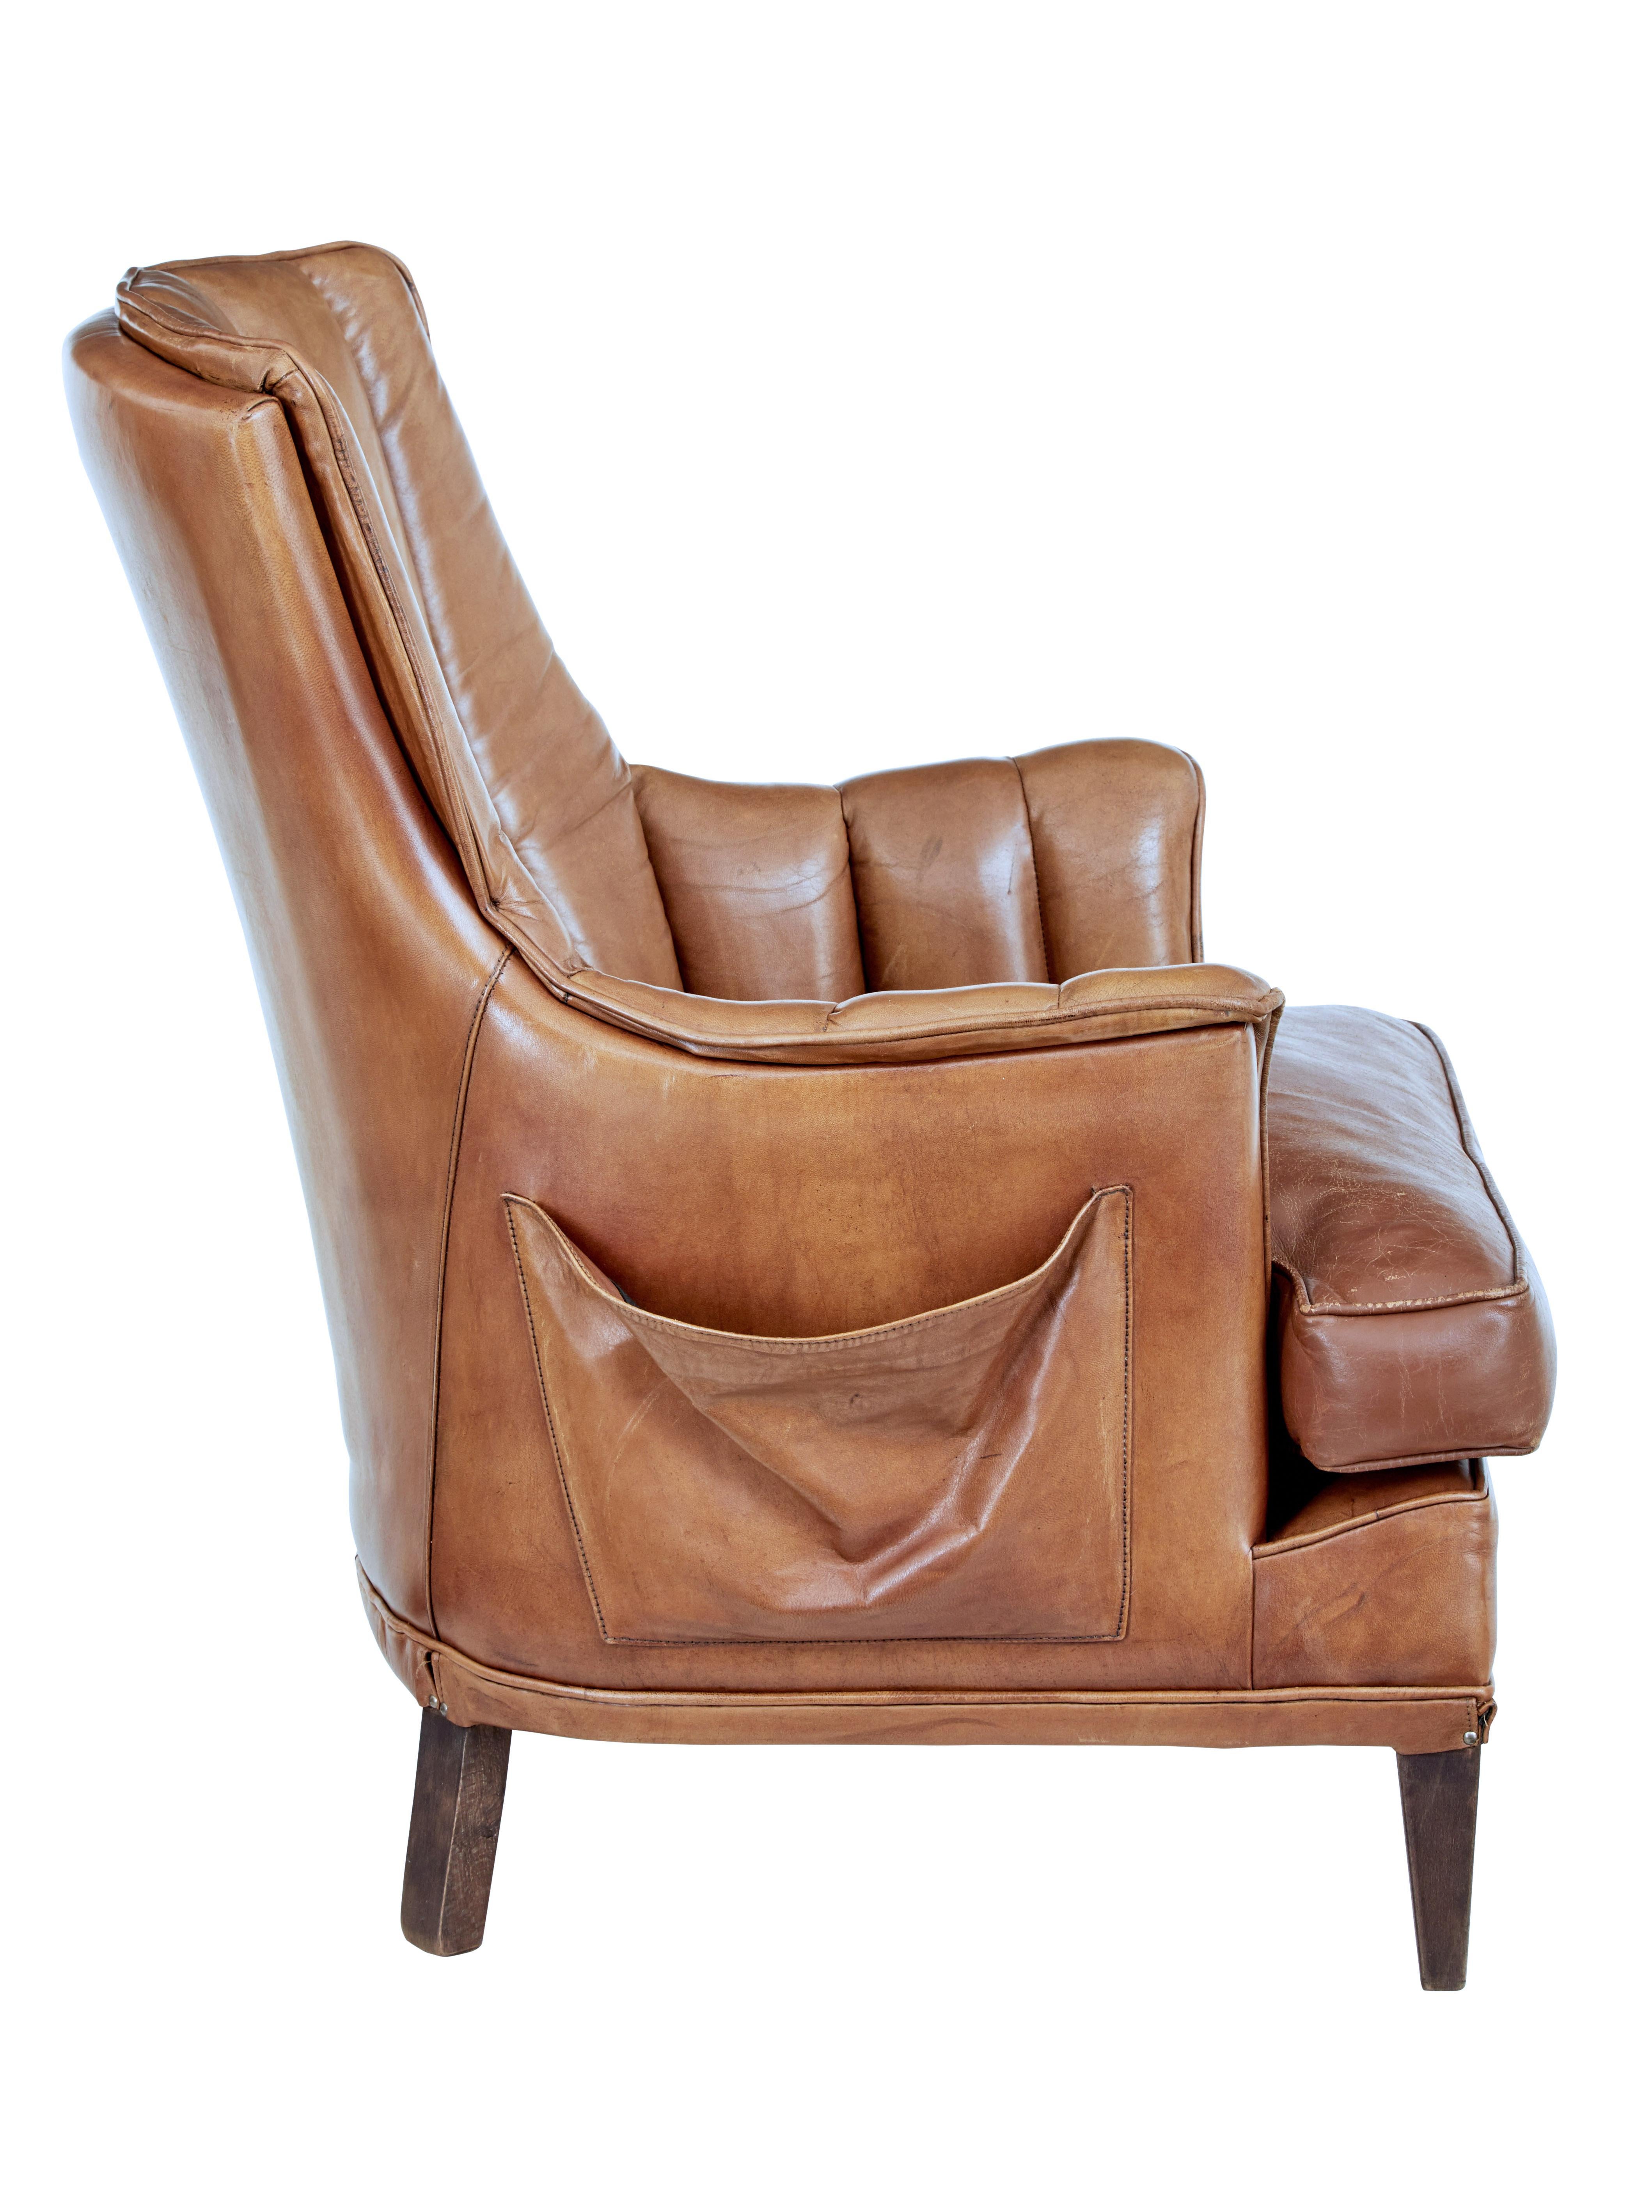 Art Deco Mid 20th century leather shell back lounge chair